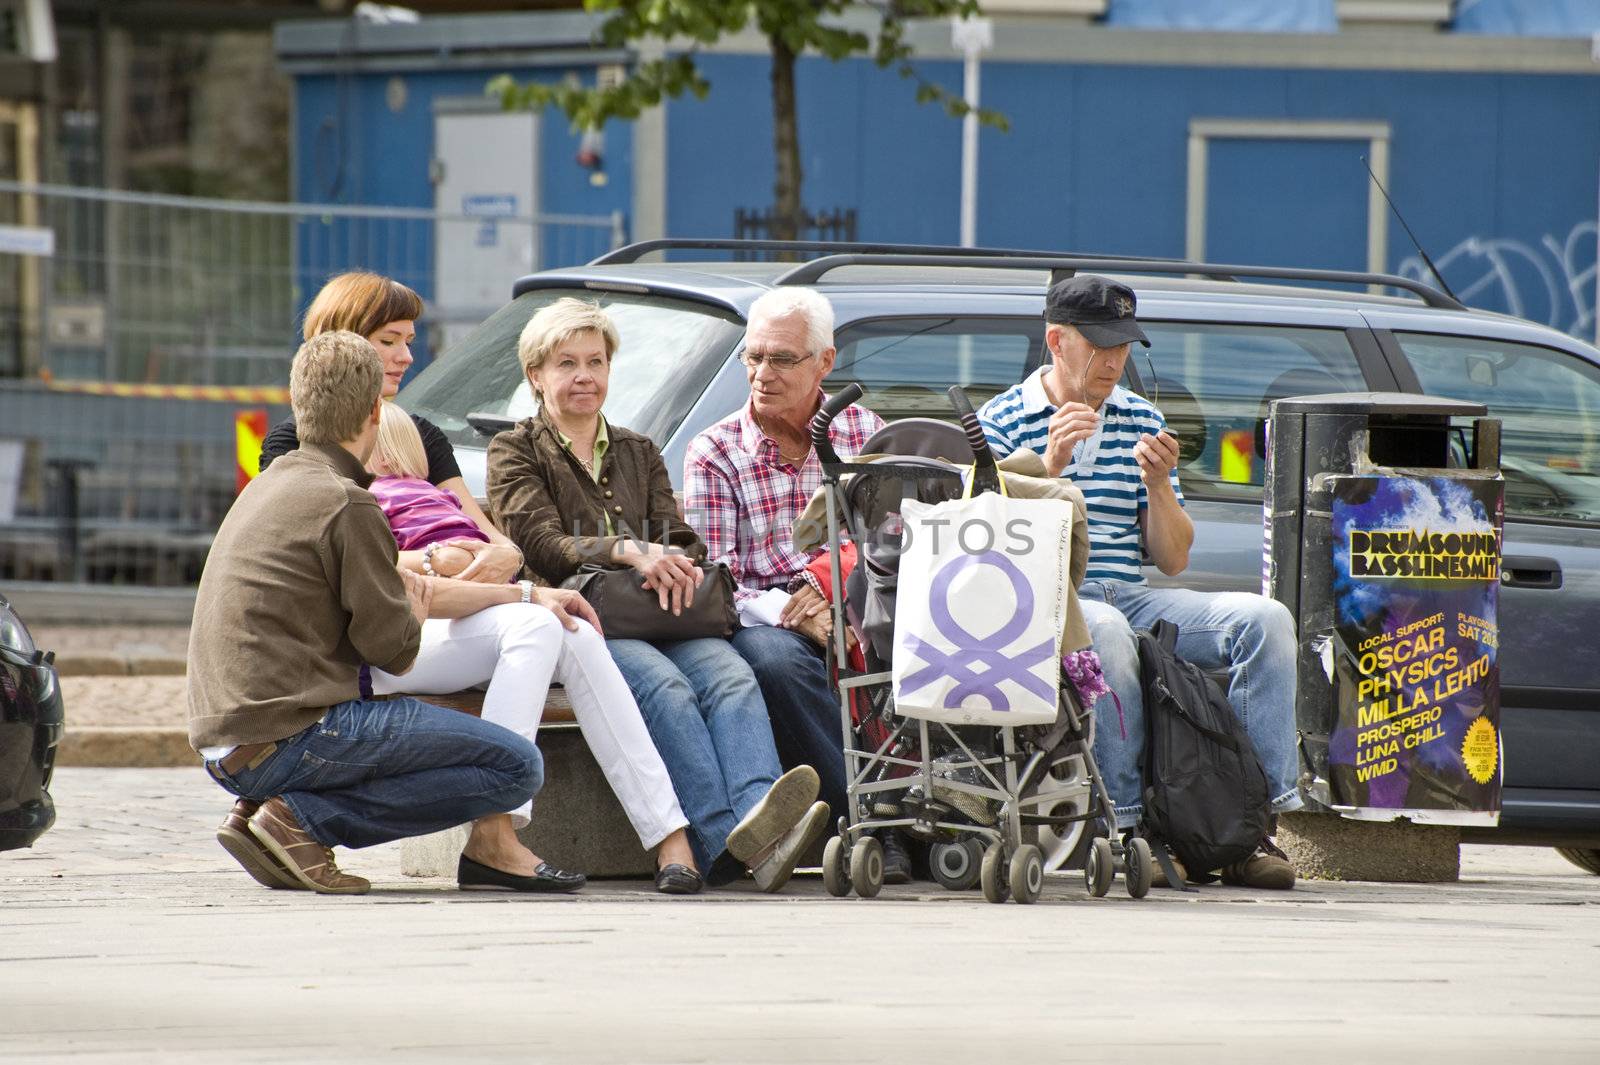 Tourists have a rest in the city, taken in Helsinki, Finland